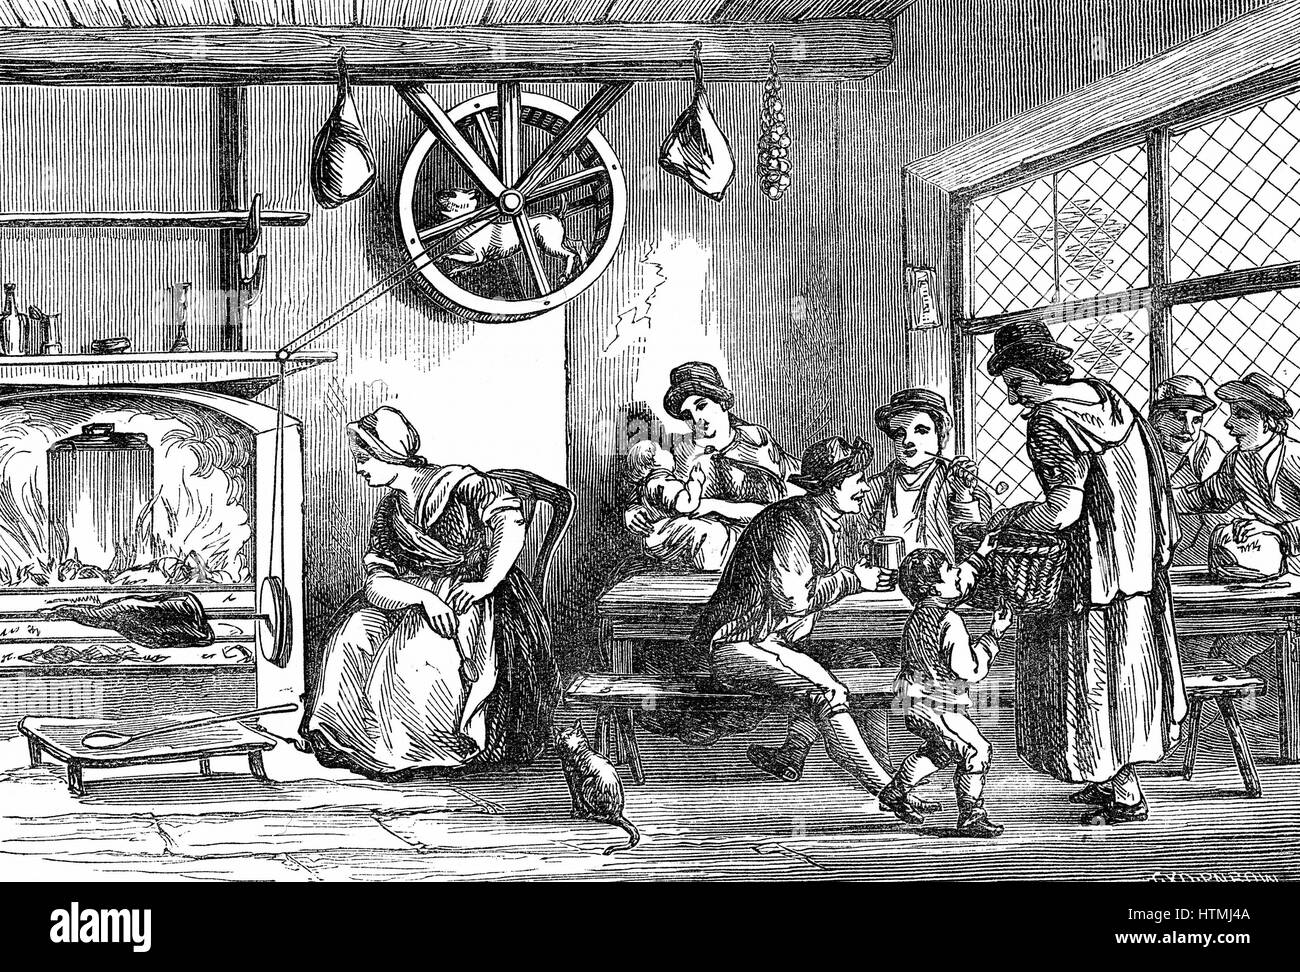 Turnspit dog at work in the inn at Newcastle, Carmarthen, Wales, c1800. These short-legged dogs were bred especially to work in wheels turning cooking spits. By 1800 the breed had almost disappeared. Wood engraving 1869. Stock Photo